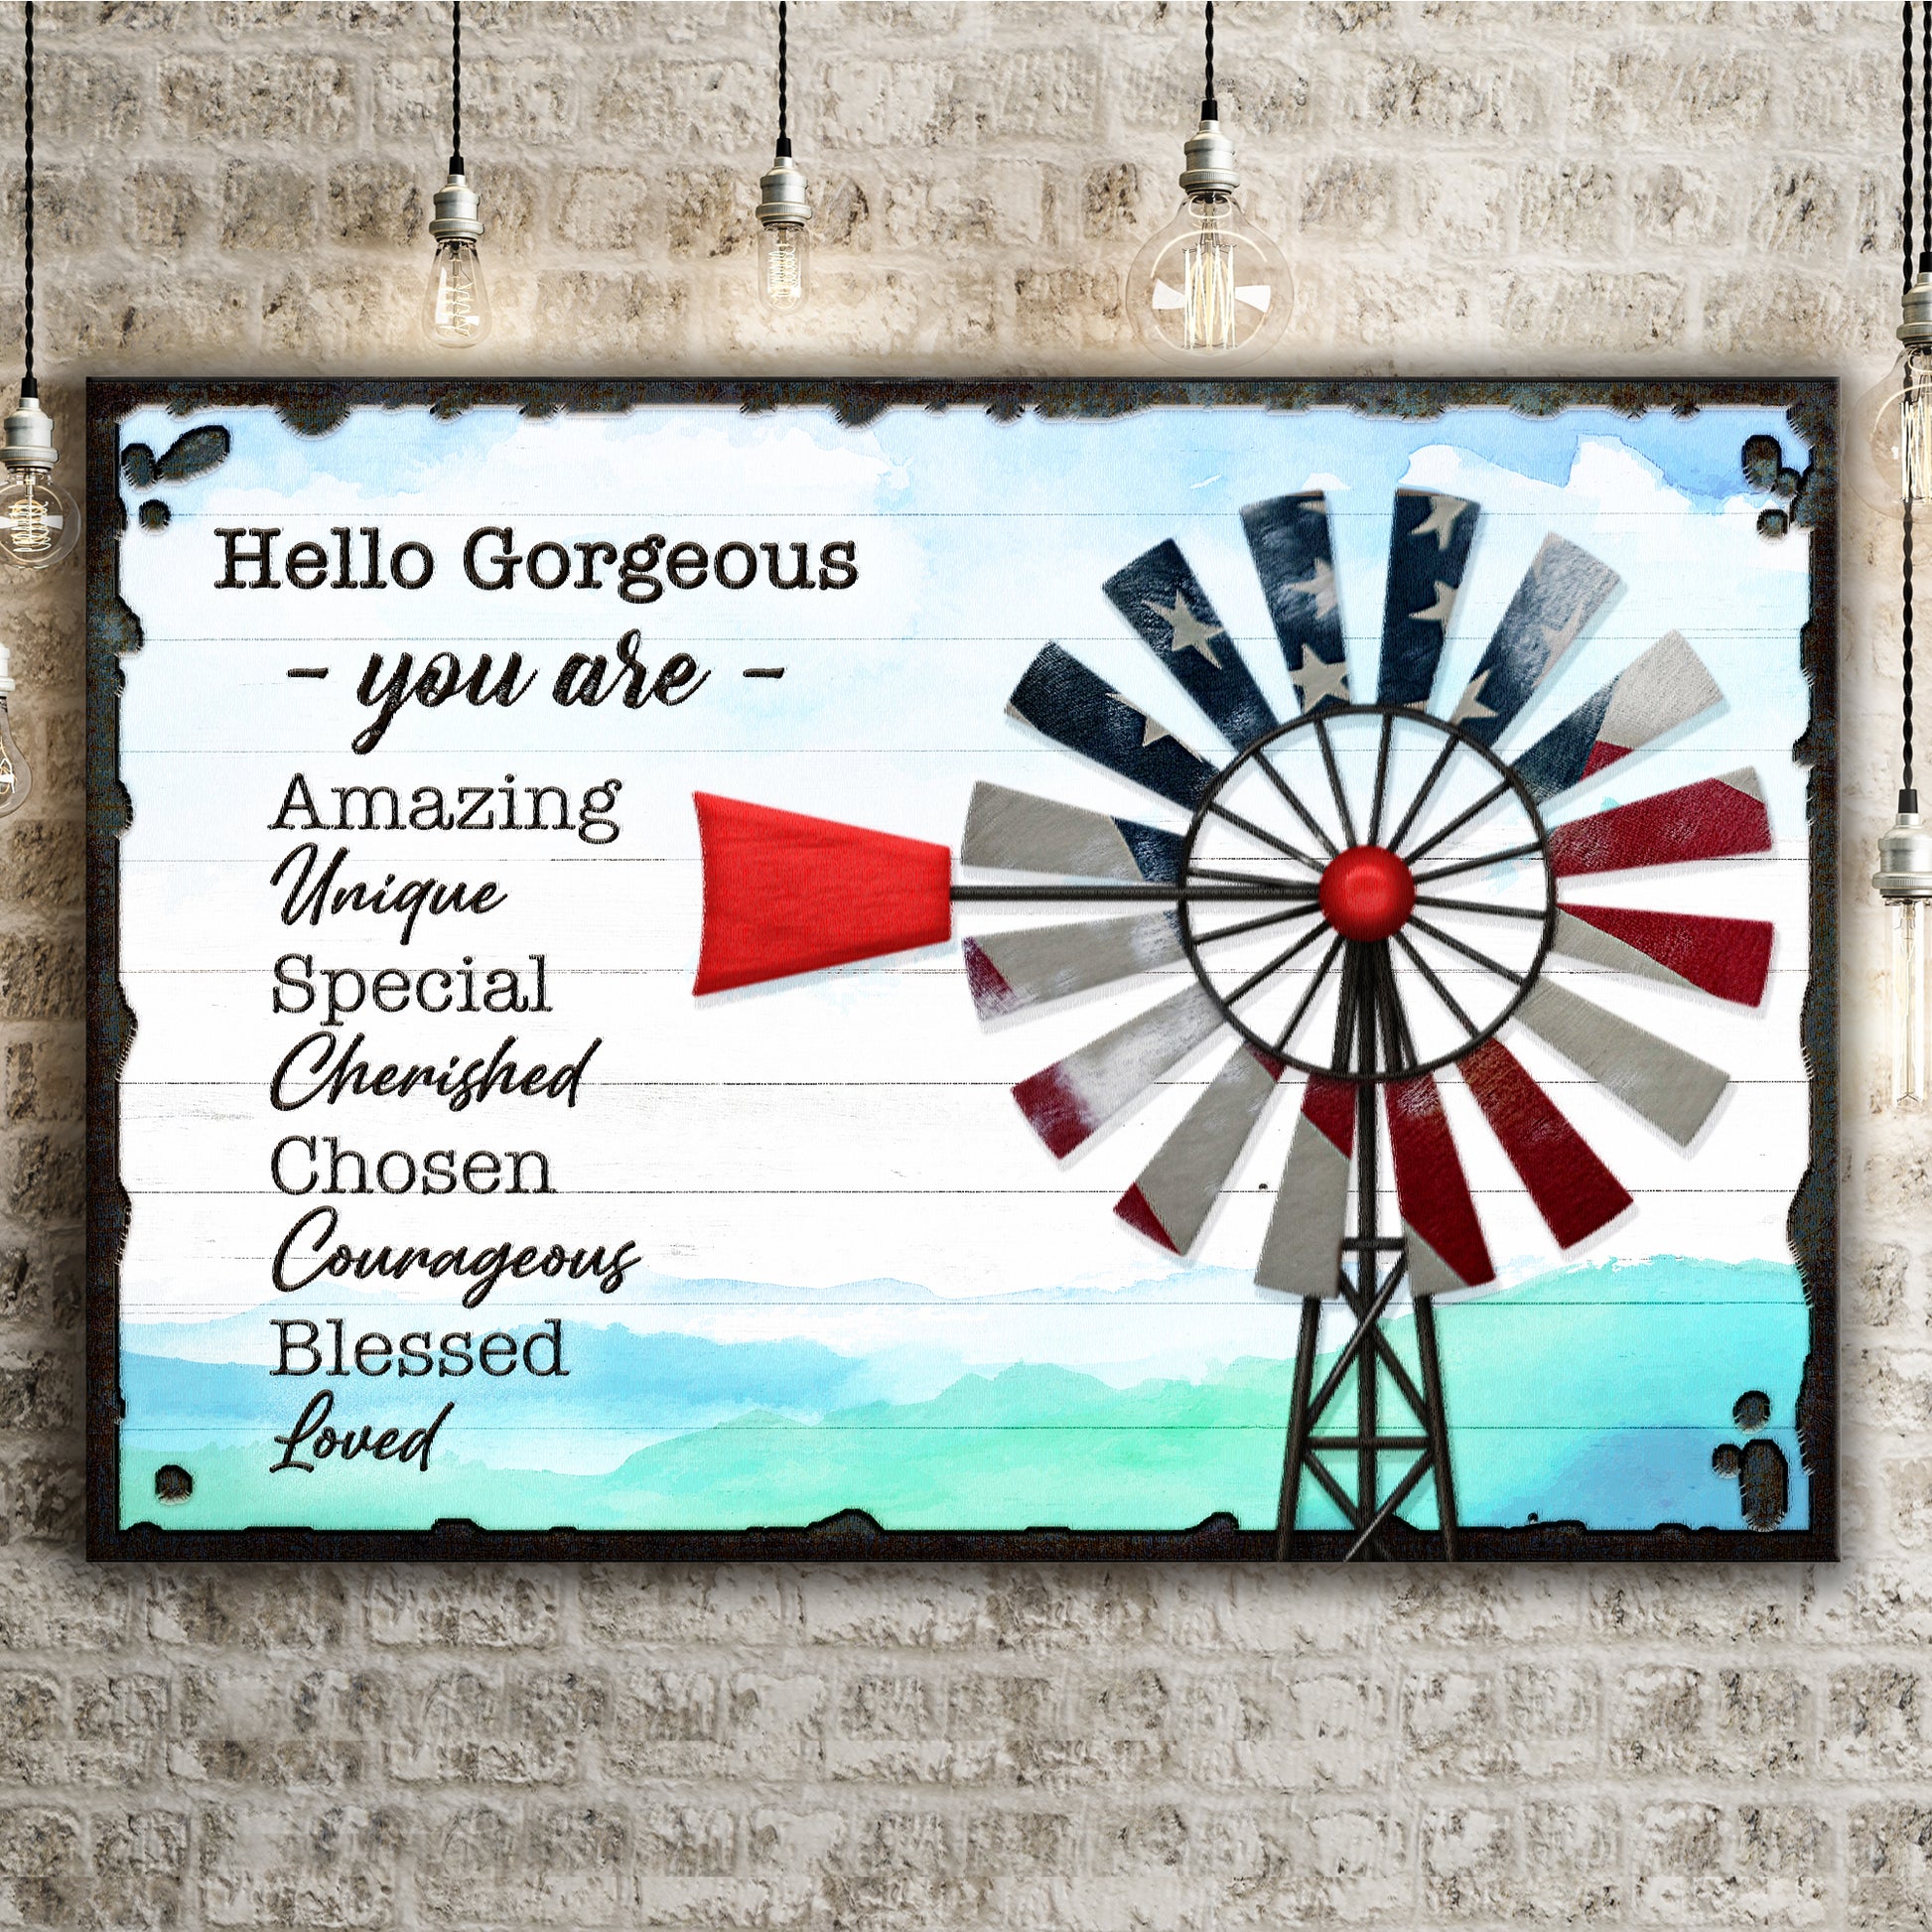 Hello Gorgeous Sign - Image by Tailored Canvases